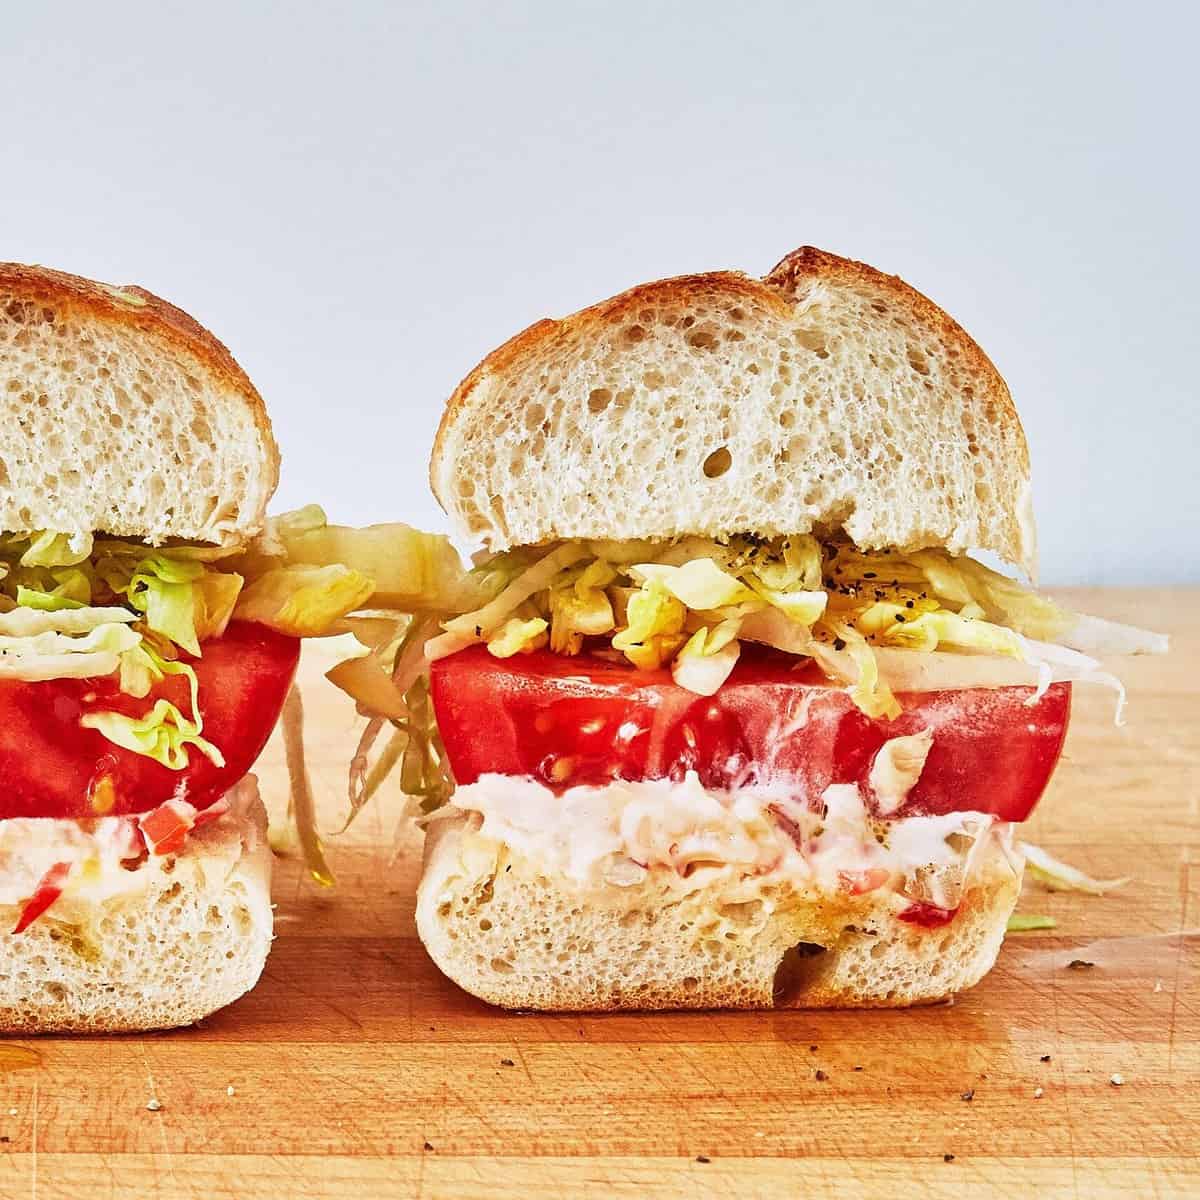  Get ready to sink your teeth into this delicious vegetarian hoagie sandwich!